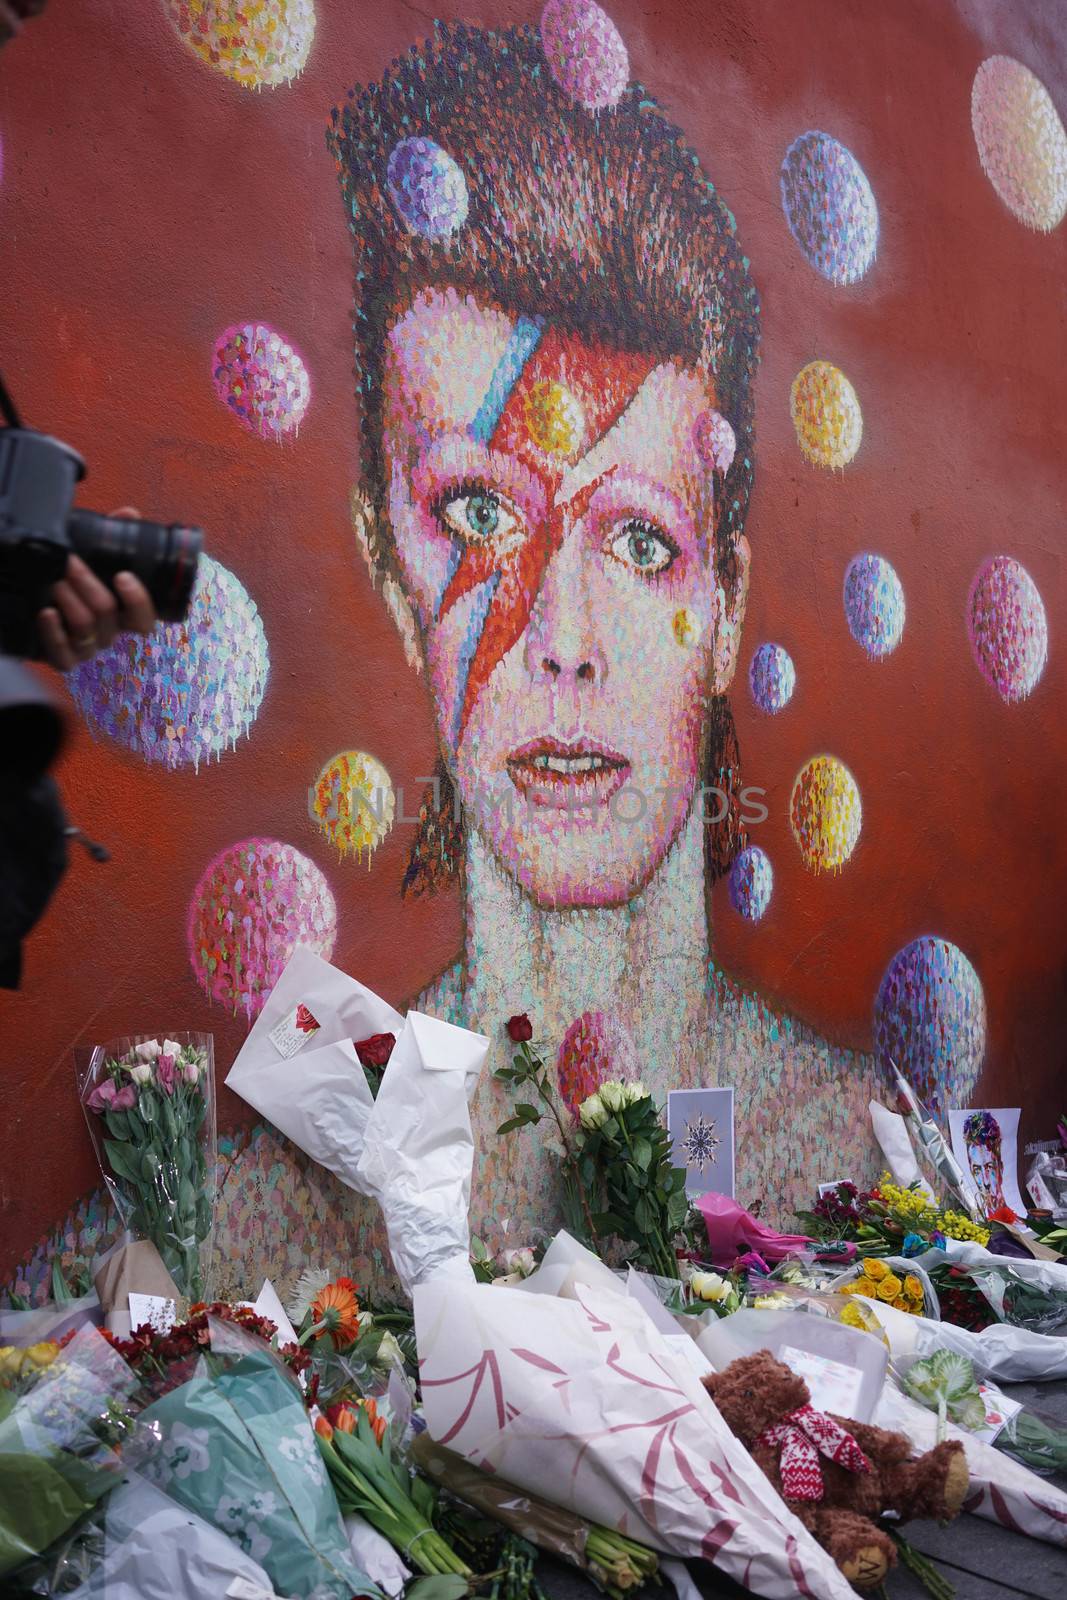 UNITED KINGDOM, London: Fans leave flowers and candles to pay tribute to British singer David Bowie, following the announcement of Bowie's death, in Brixton, south London, on January 11, 2016. British music icon David Bowie died of cancer at the age of 69, drawing an outpouring of tributes for the innovative star famed for groundbreaking hits like Ziggy Stardust and his theatrical shape-shifting style. 